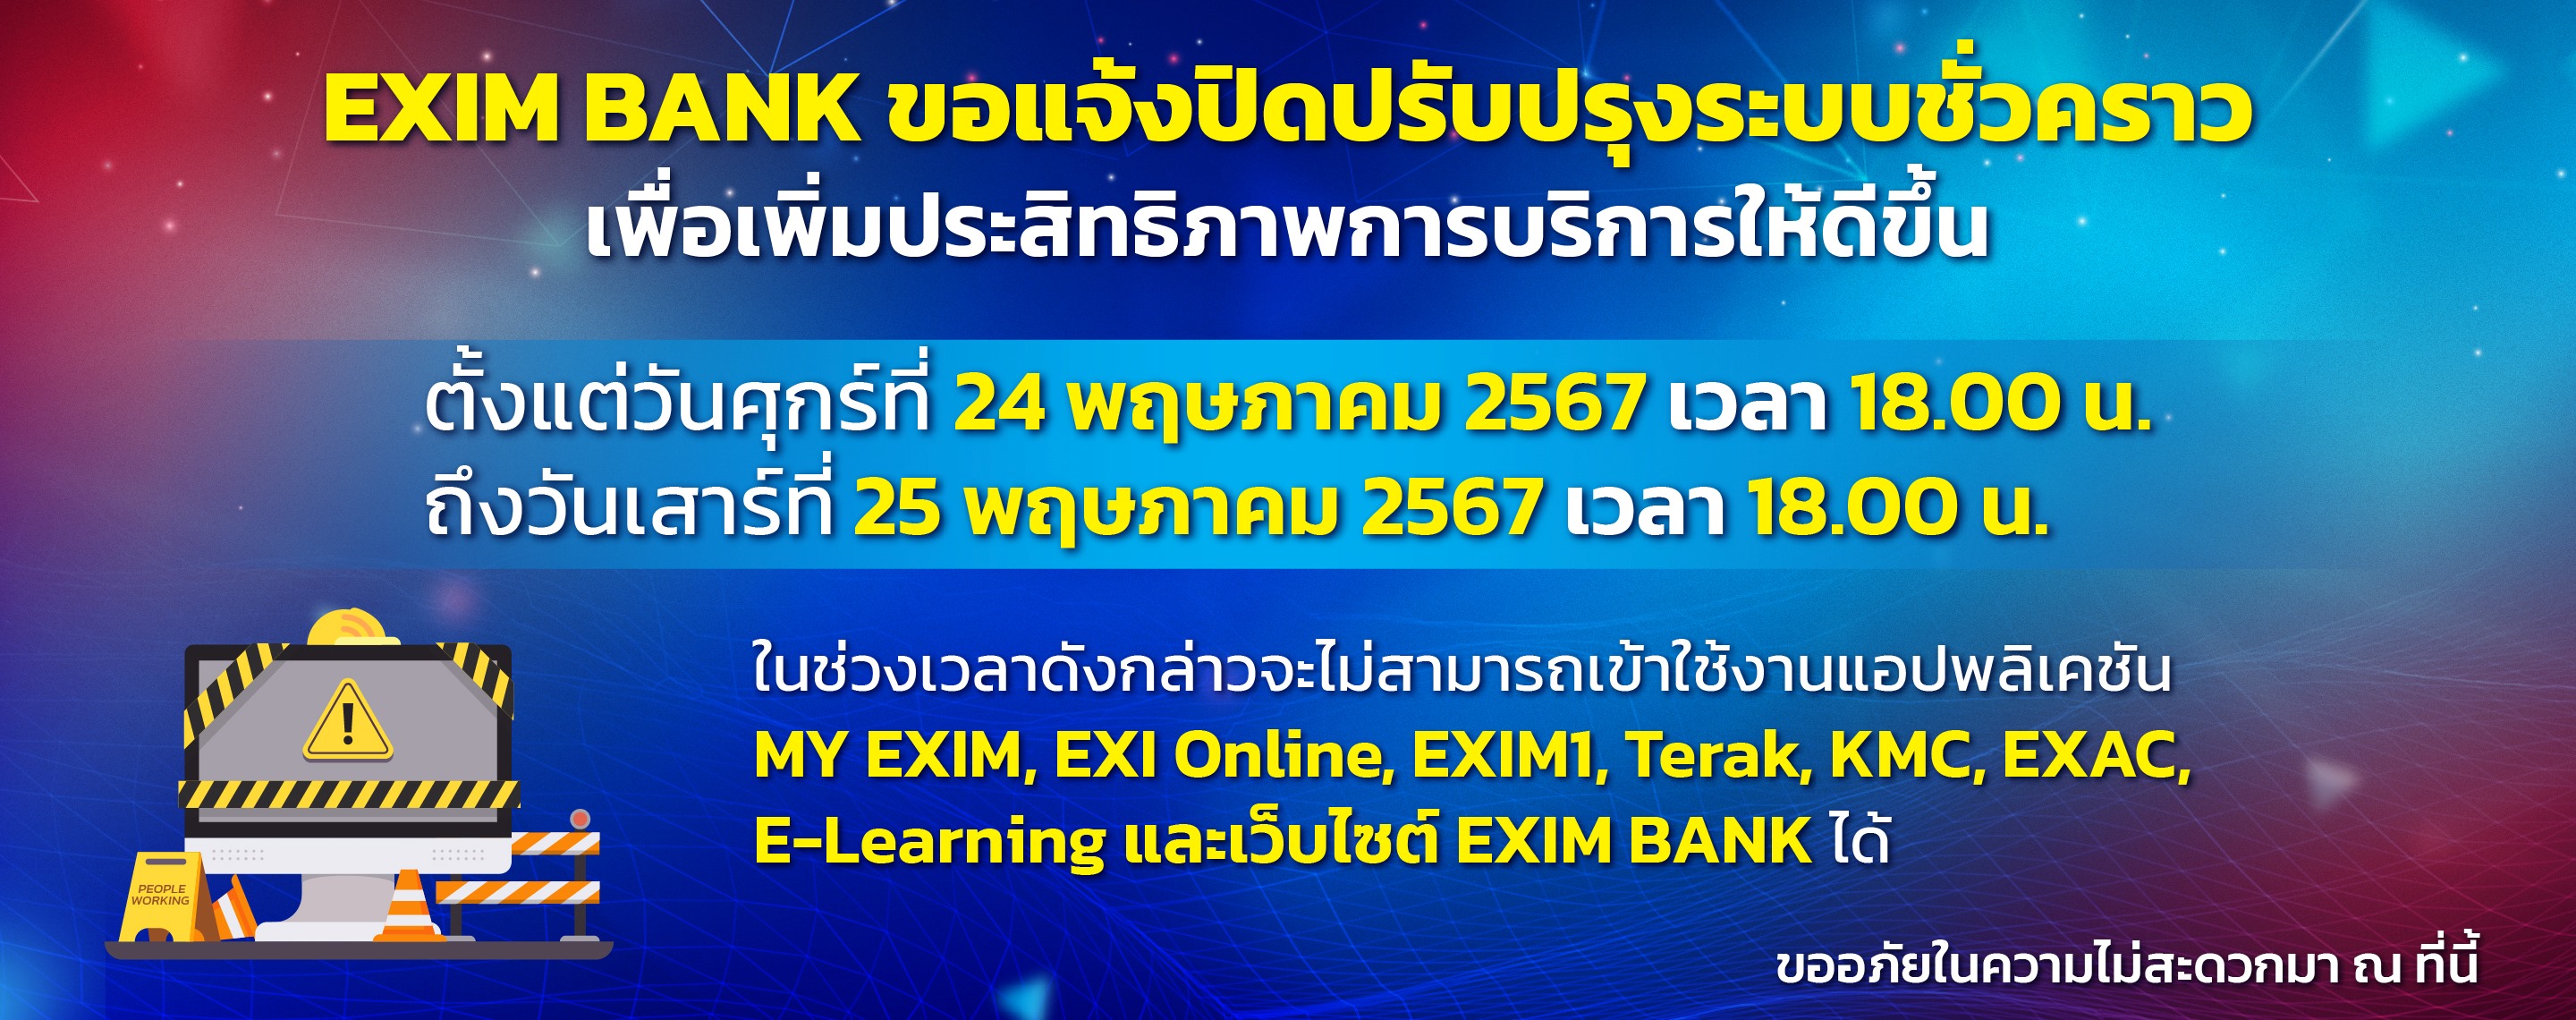 EXIM Thailand and Russia’s VTB Bank Promote Thai-Russian Trade and Investment